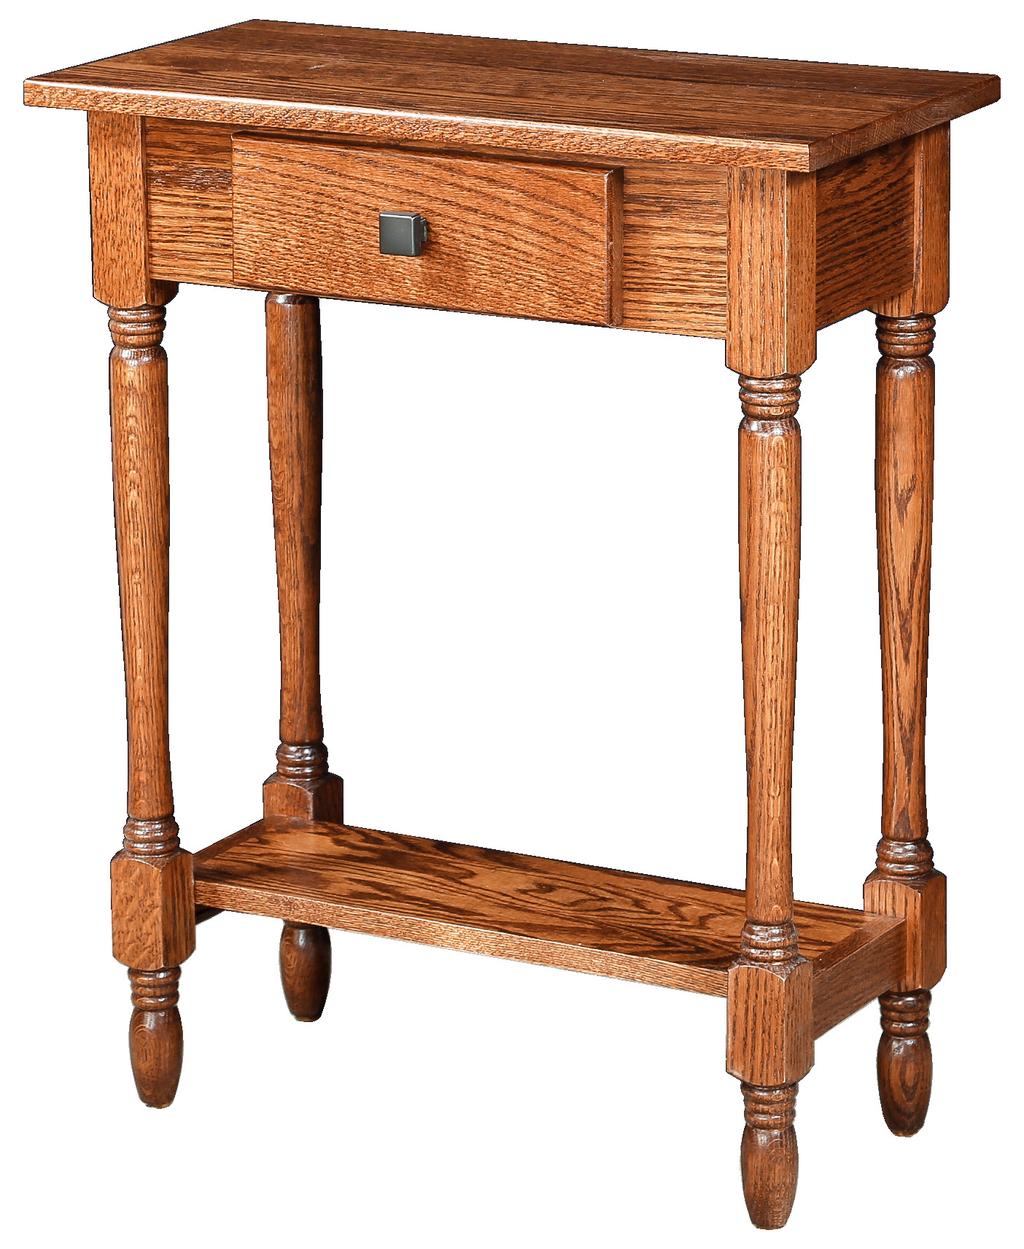 Shown with Mississippi Maple stain 2 Drawer Hall Table 13"D